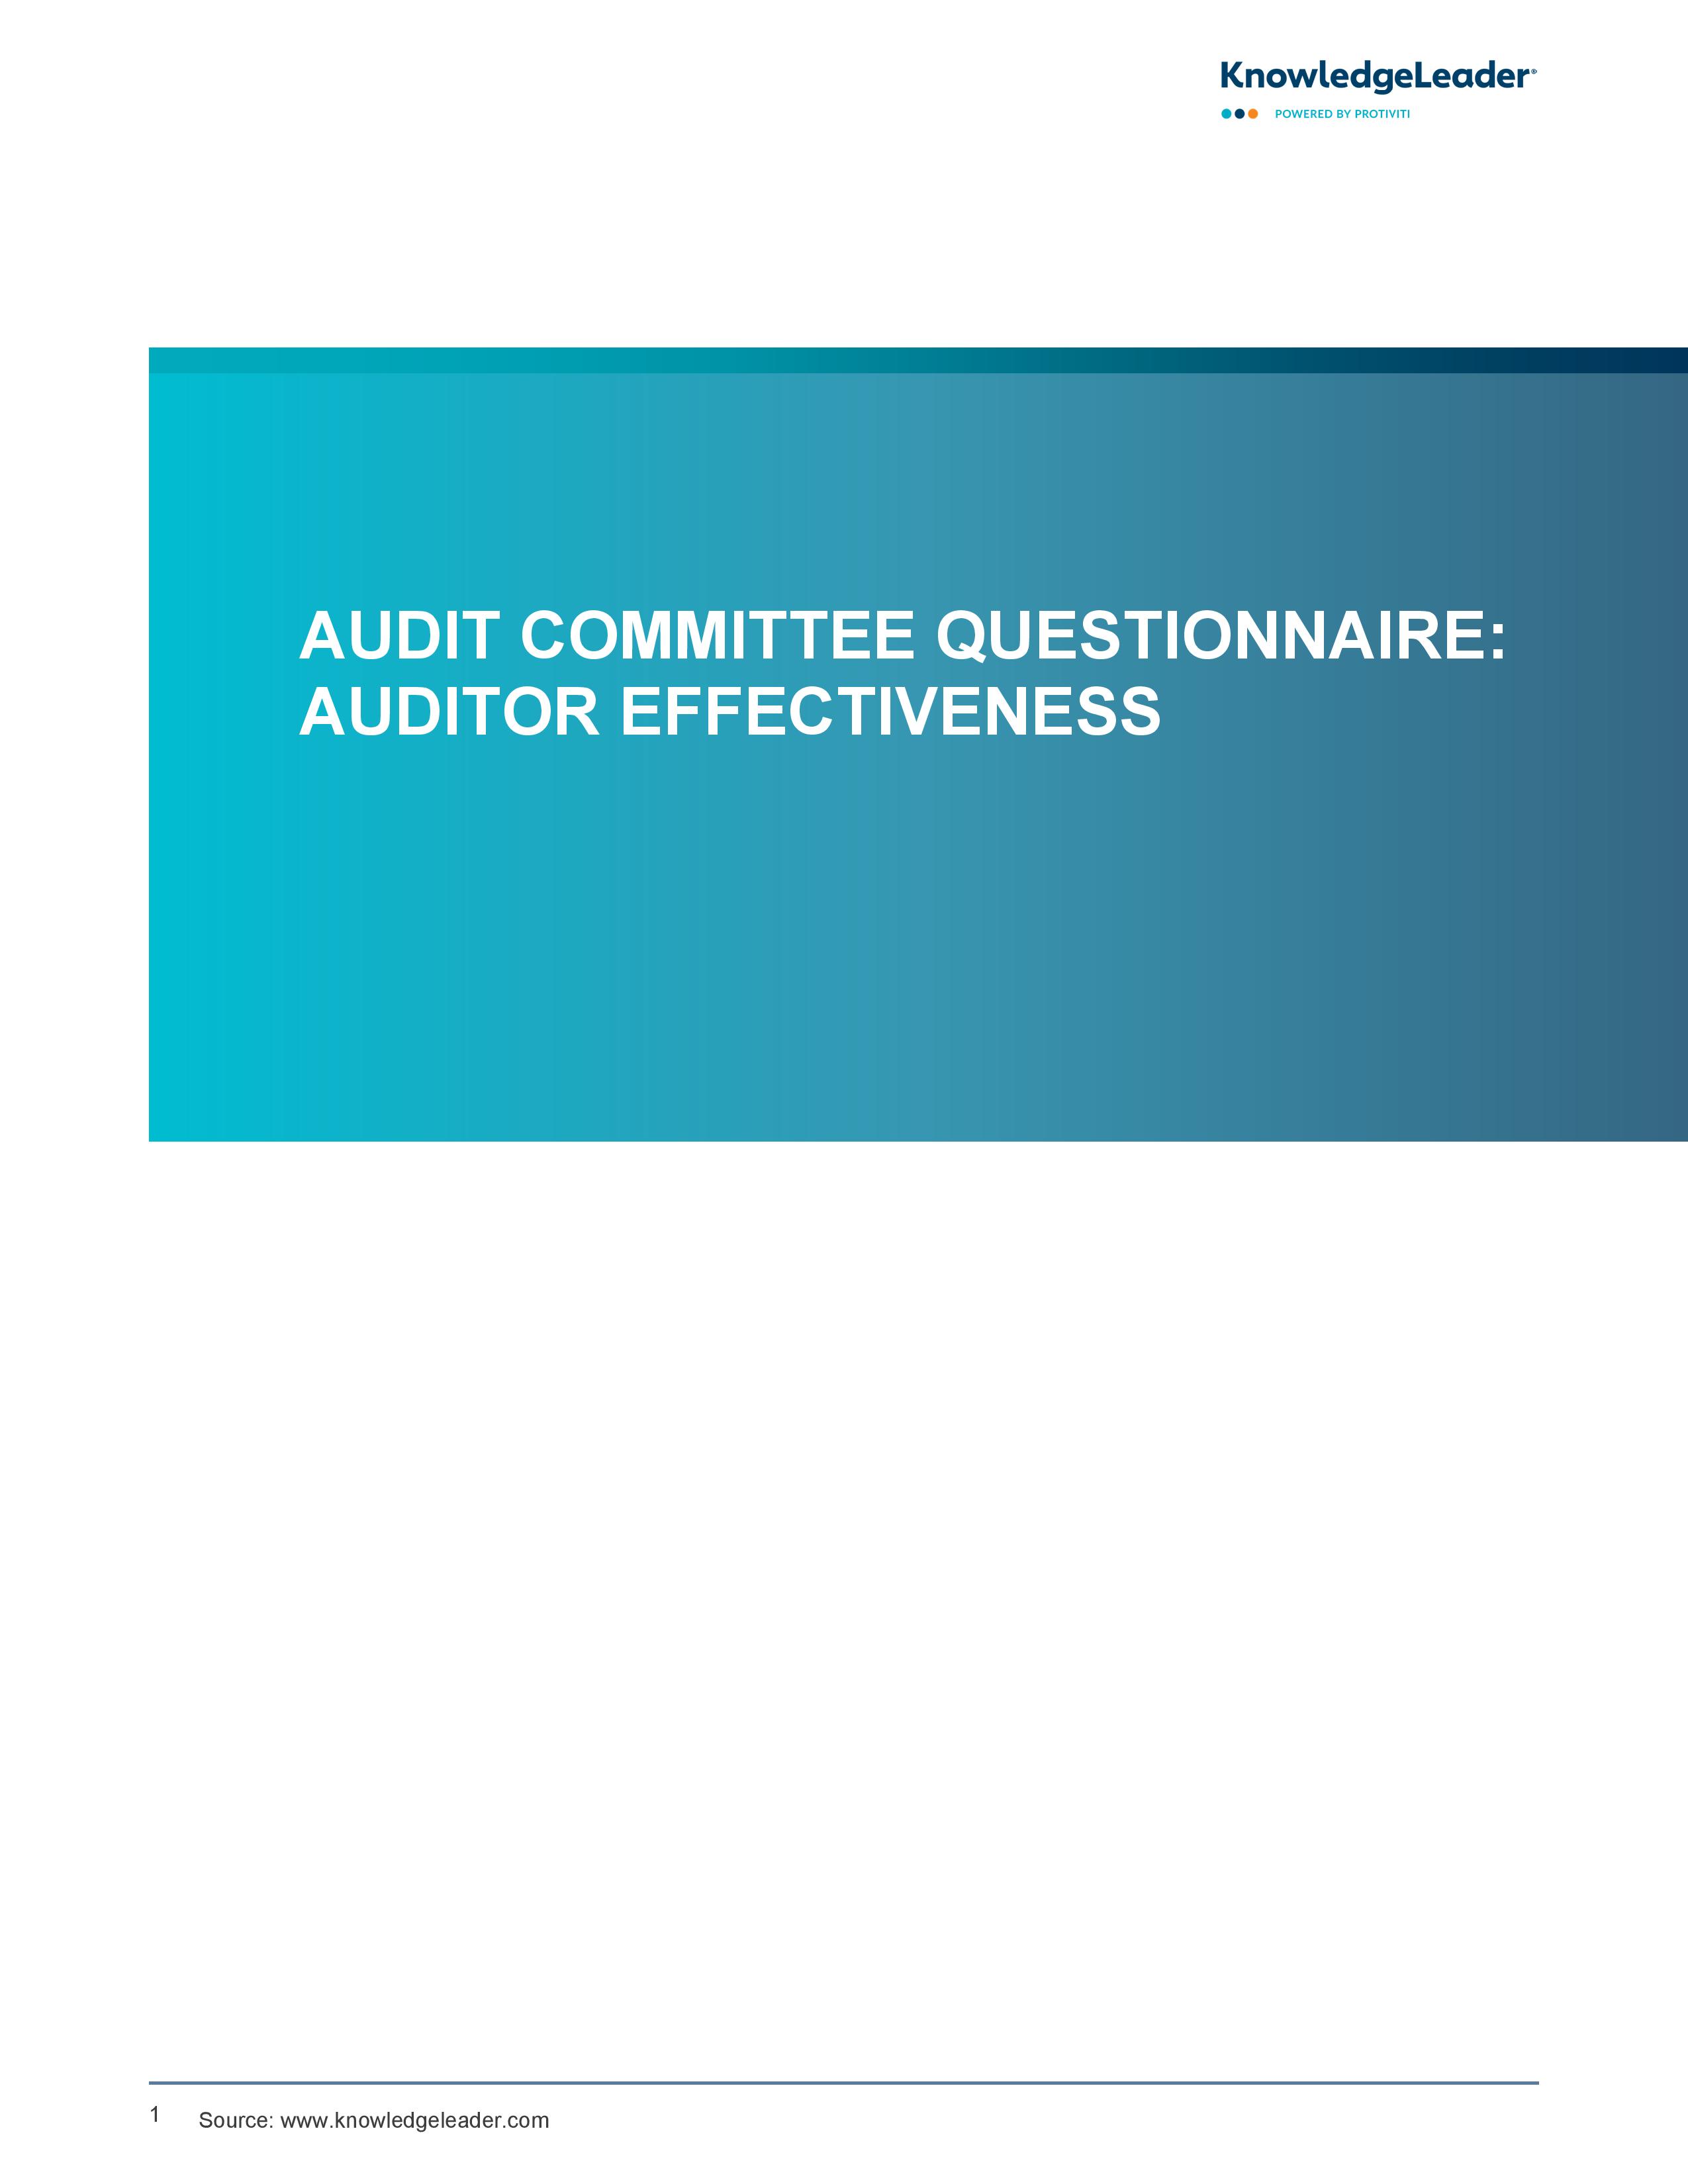 screenshot of the first page of Audit Committee Questionnaire - Auditor Effectiveness